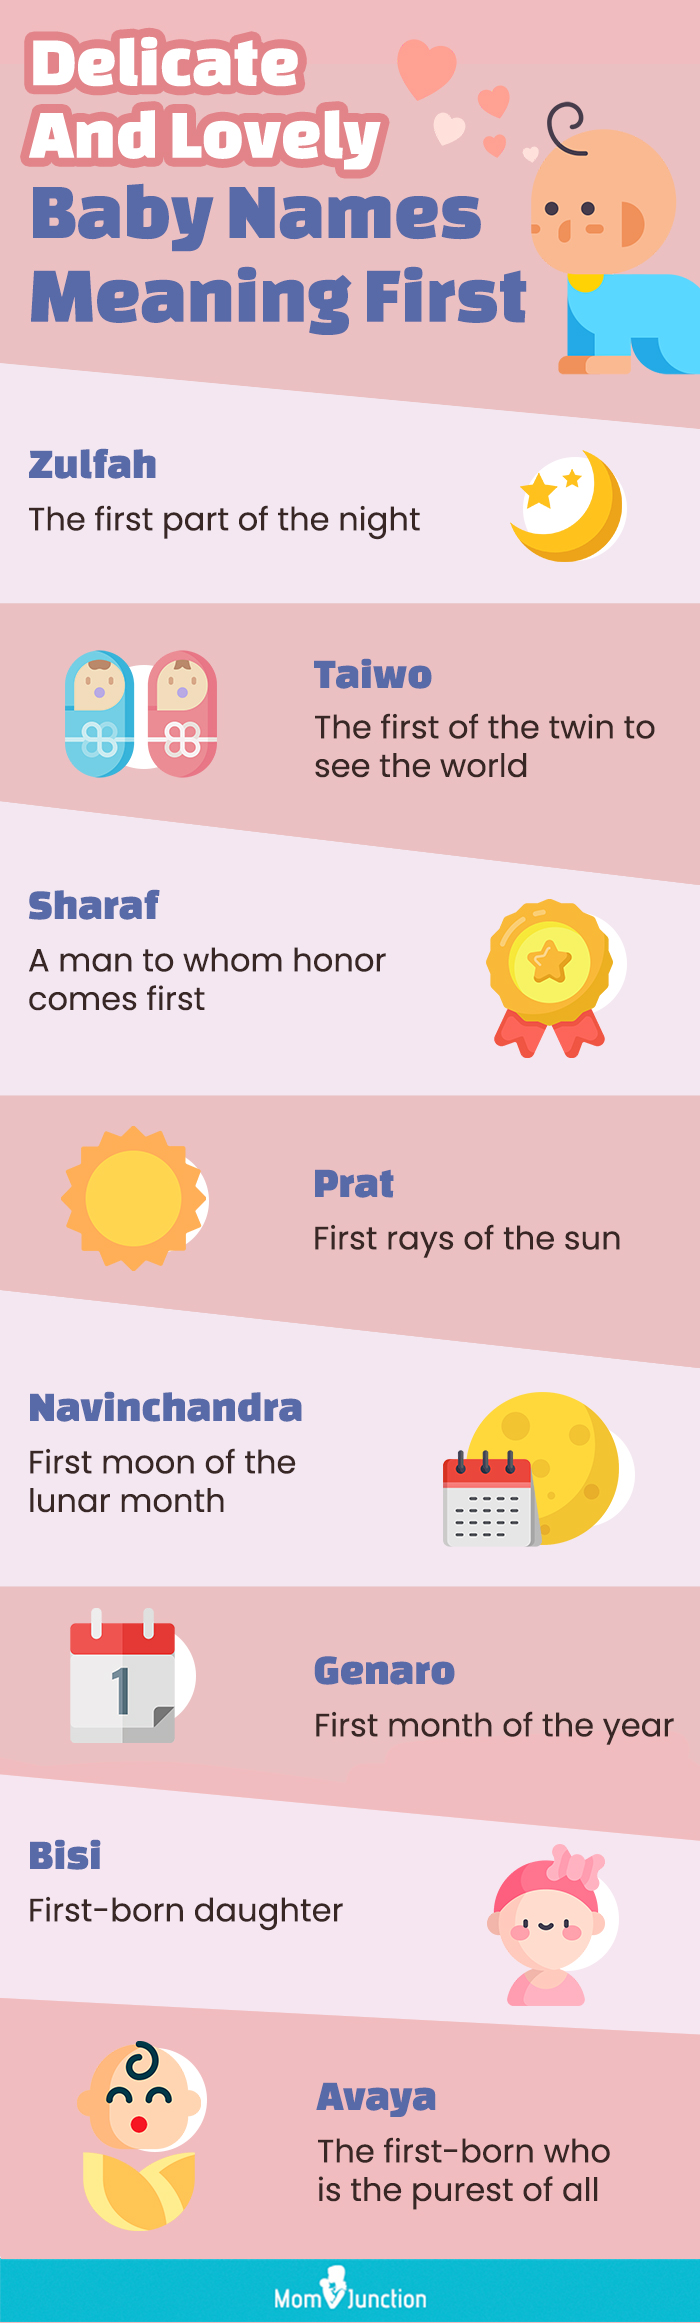 delicate and lovely baby names meaning first (infographic)